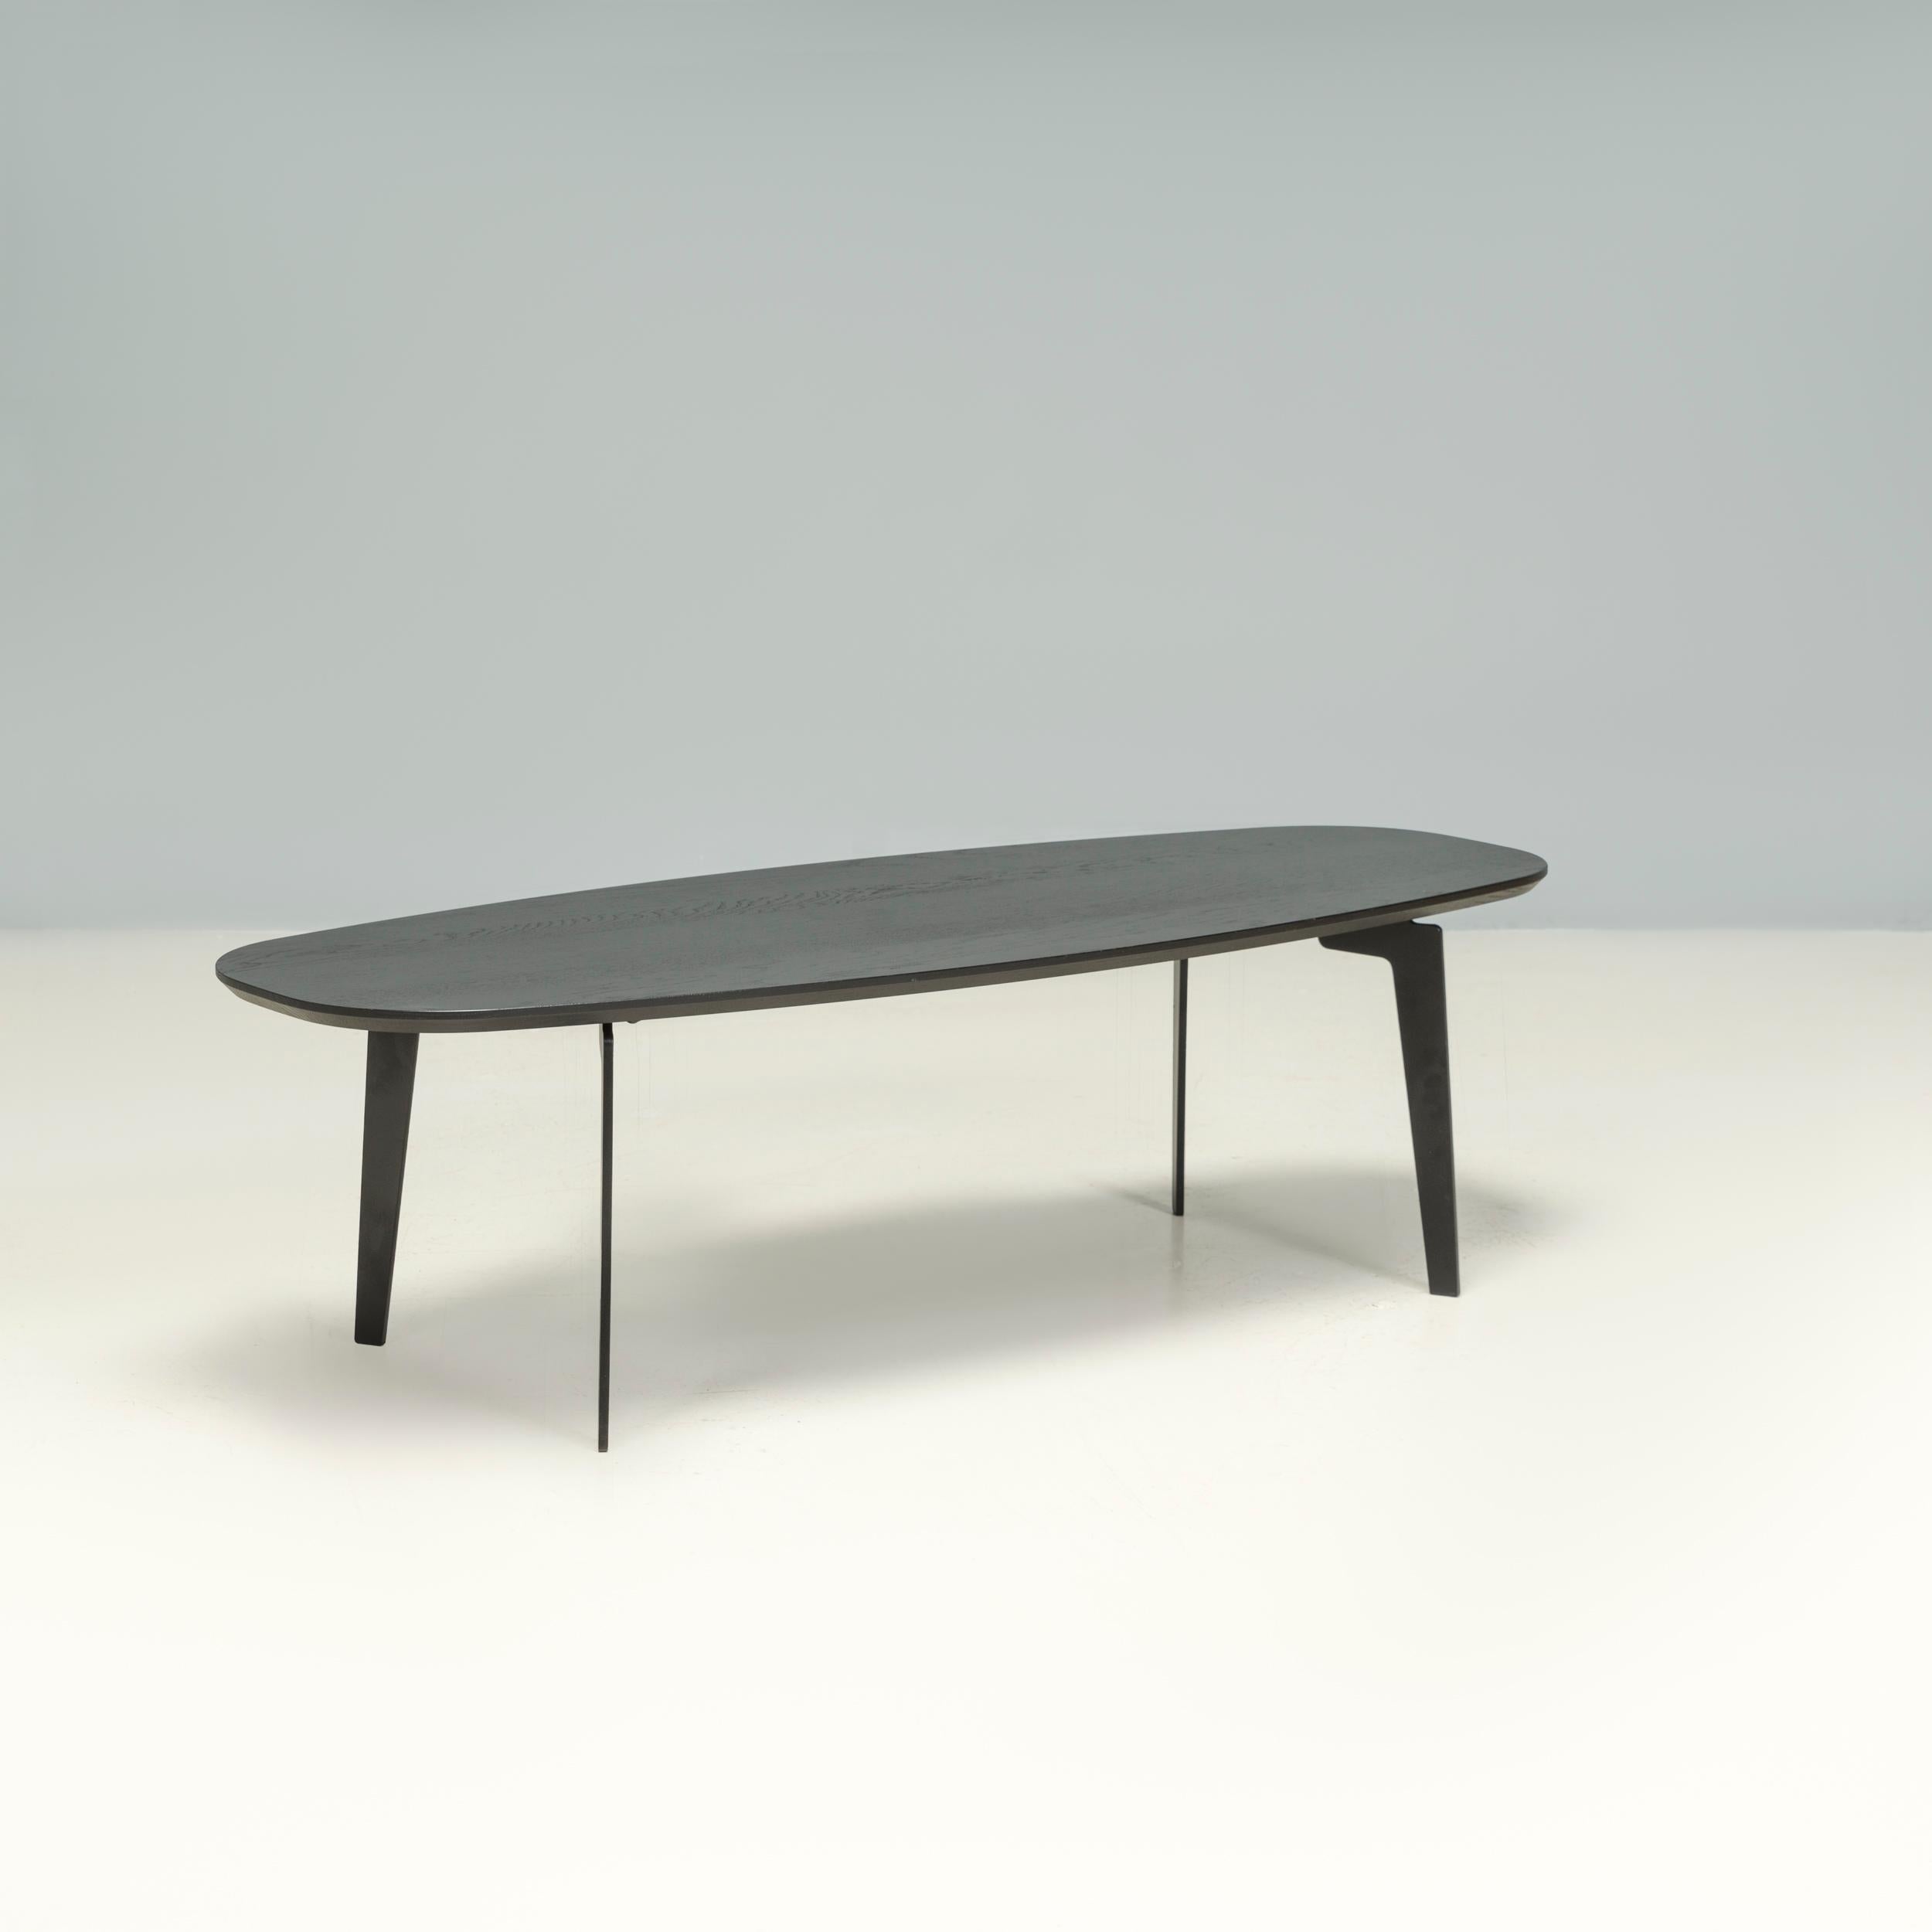 Designed in Denmark by Fritz Hansen in 2014, this coffee table was manufactured in Sweden in 2017 and forms part of the JOIN™ collection.

With an oval shaped table top in black oak, the coffee table has an angular four-legged base, constructed from